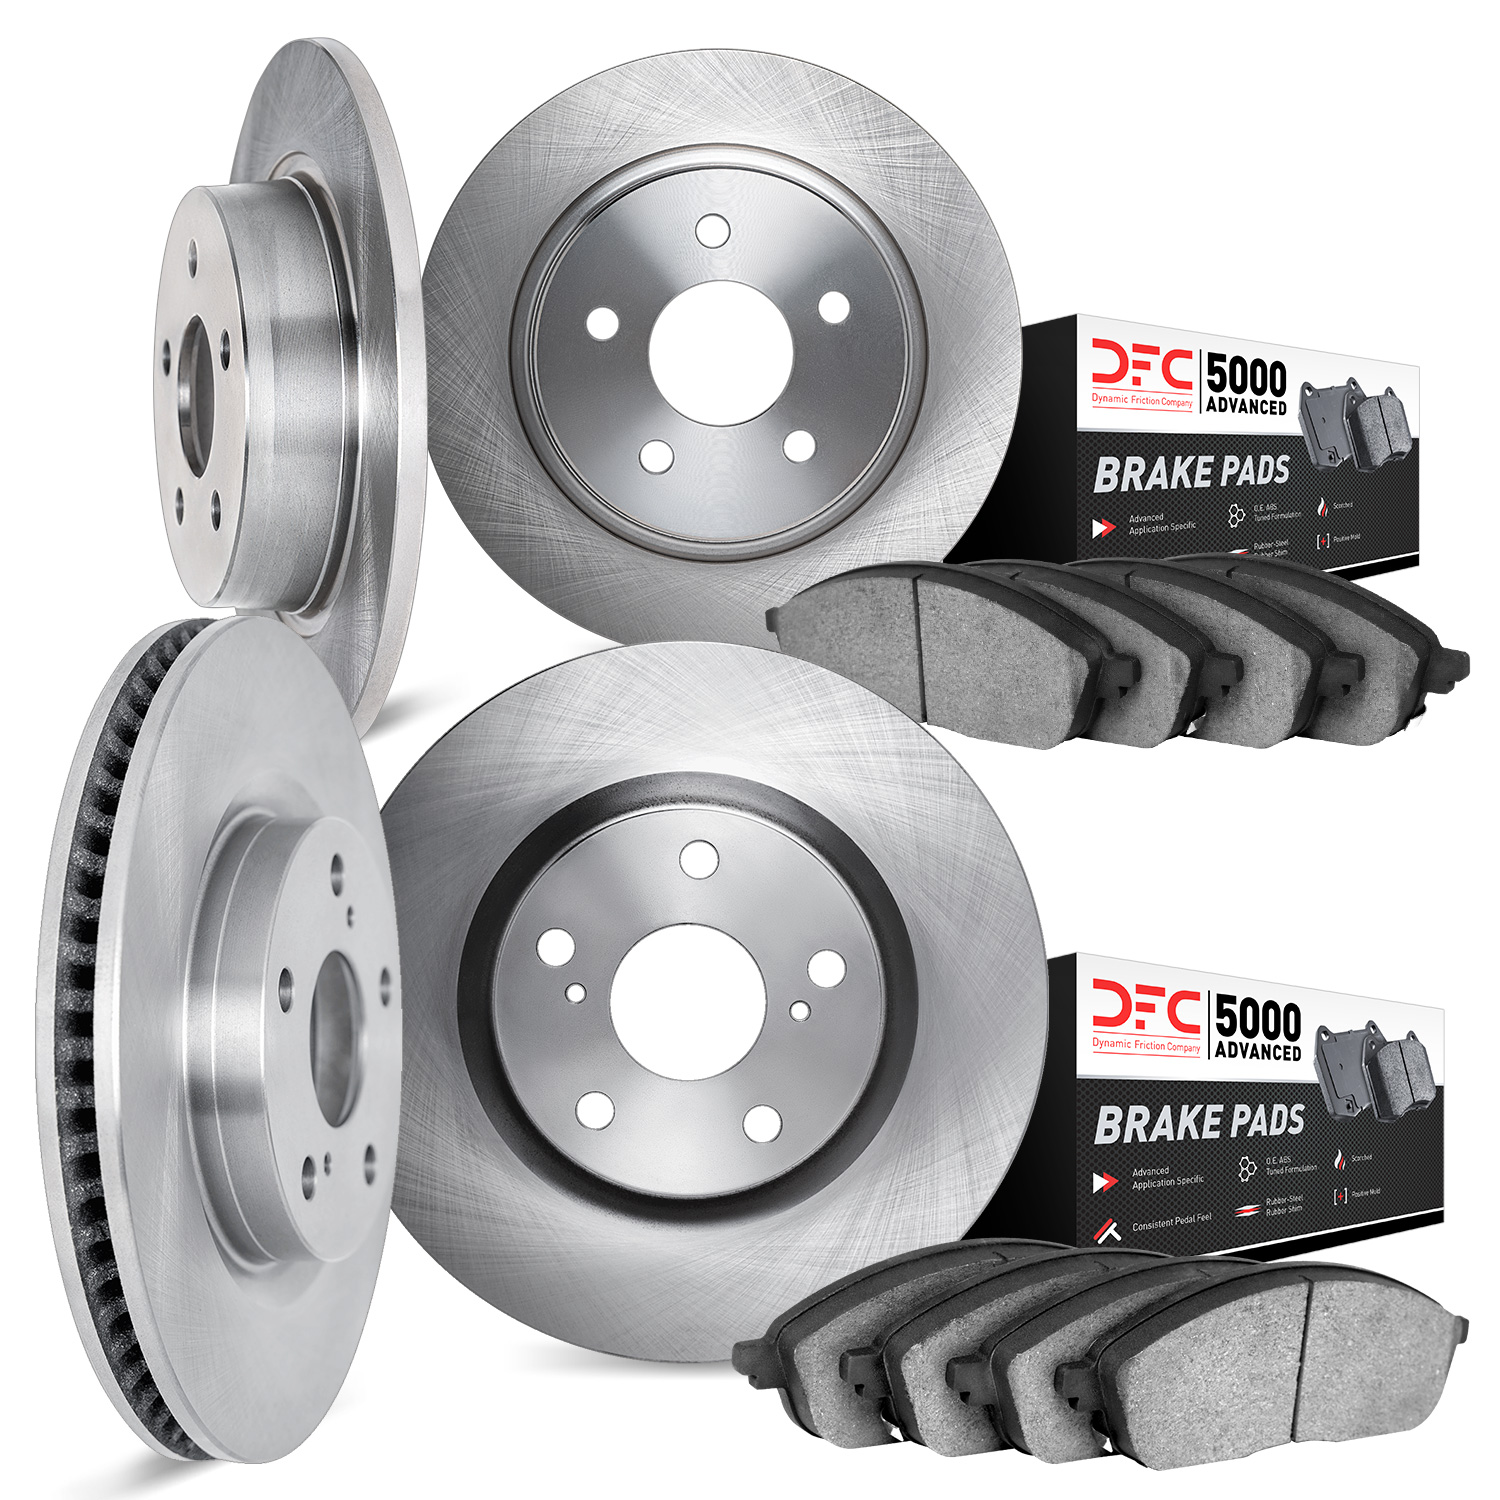 6504-53032 Brake Rotors w/5000 Advanced Brake Pads Kit, 2004-2012 GM, Position: Front and Rear